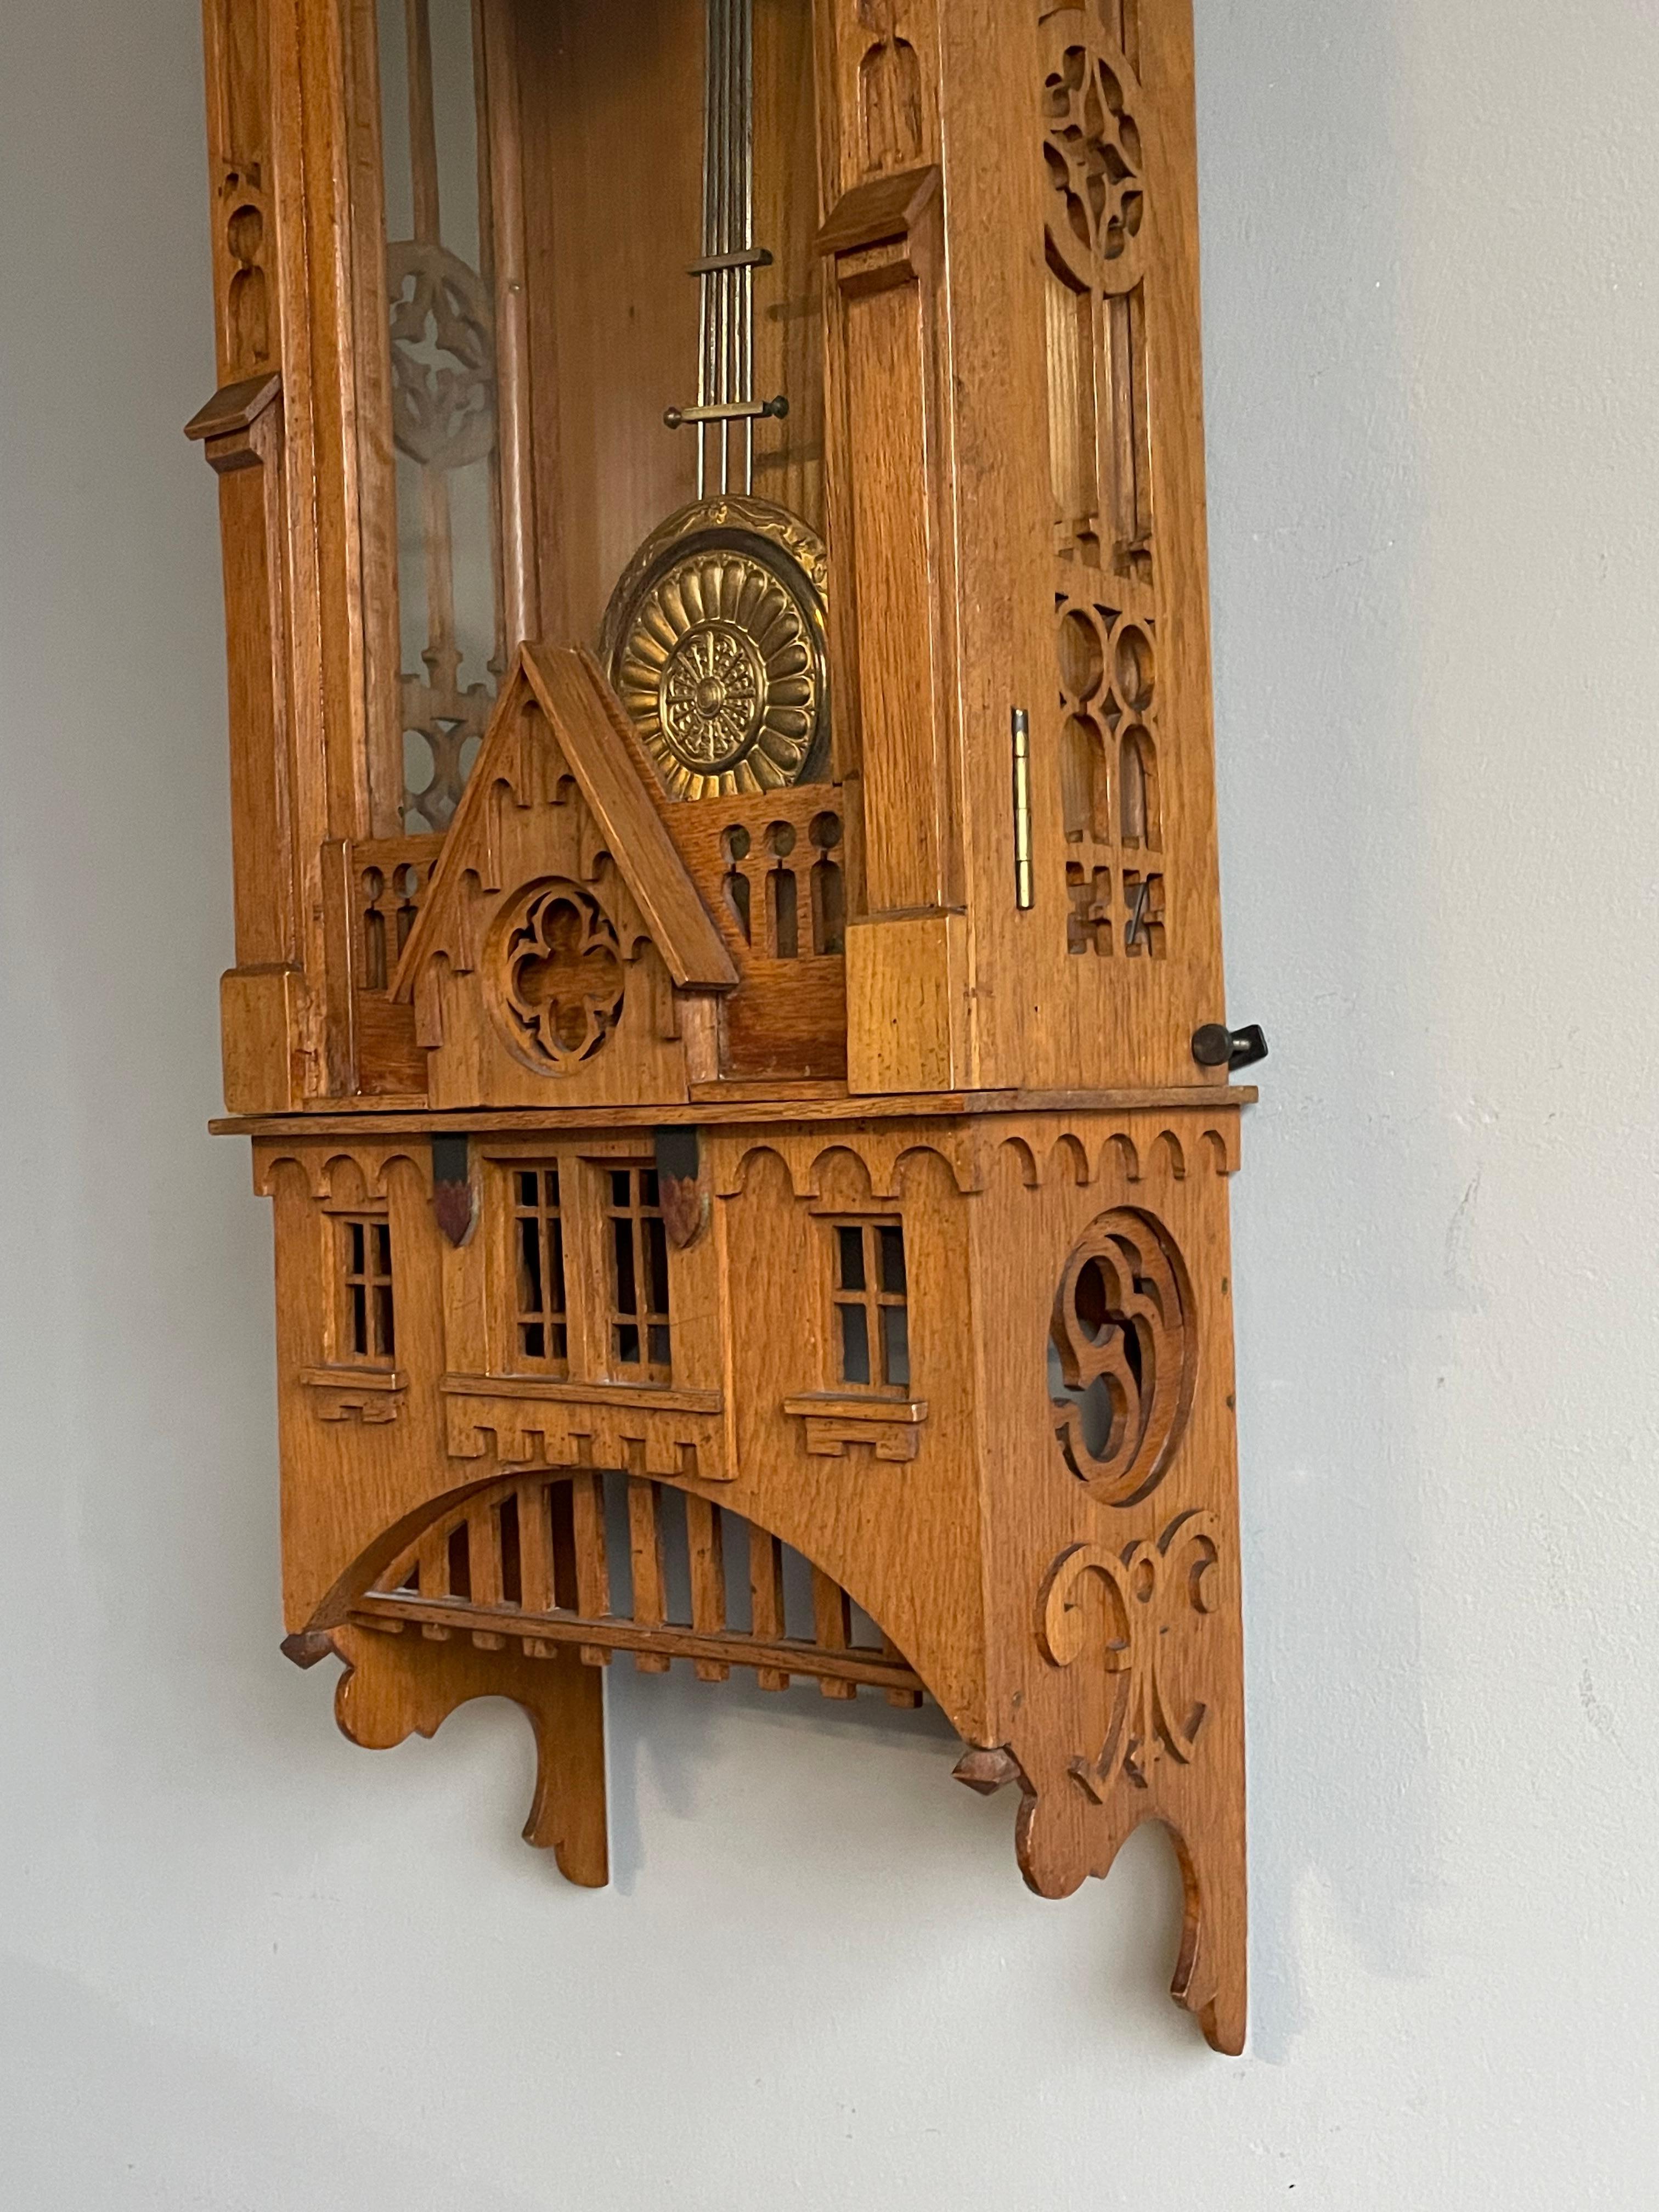 20th Century Rare & Large All Handcrafted Antique Gothic Revival Solid Oak Wall Clock ca 1900